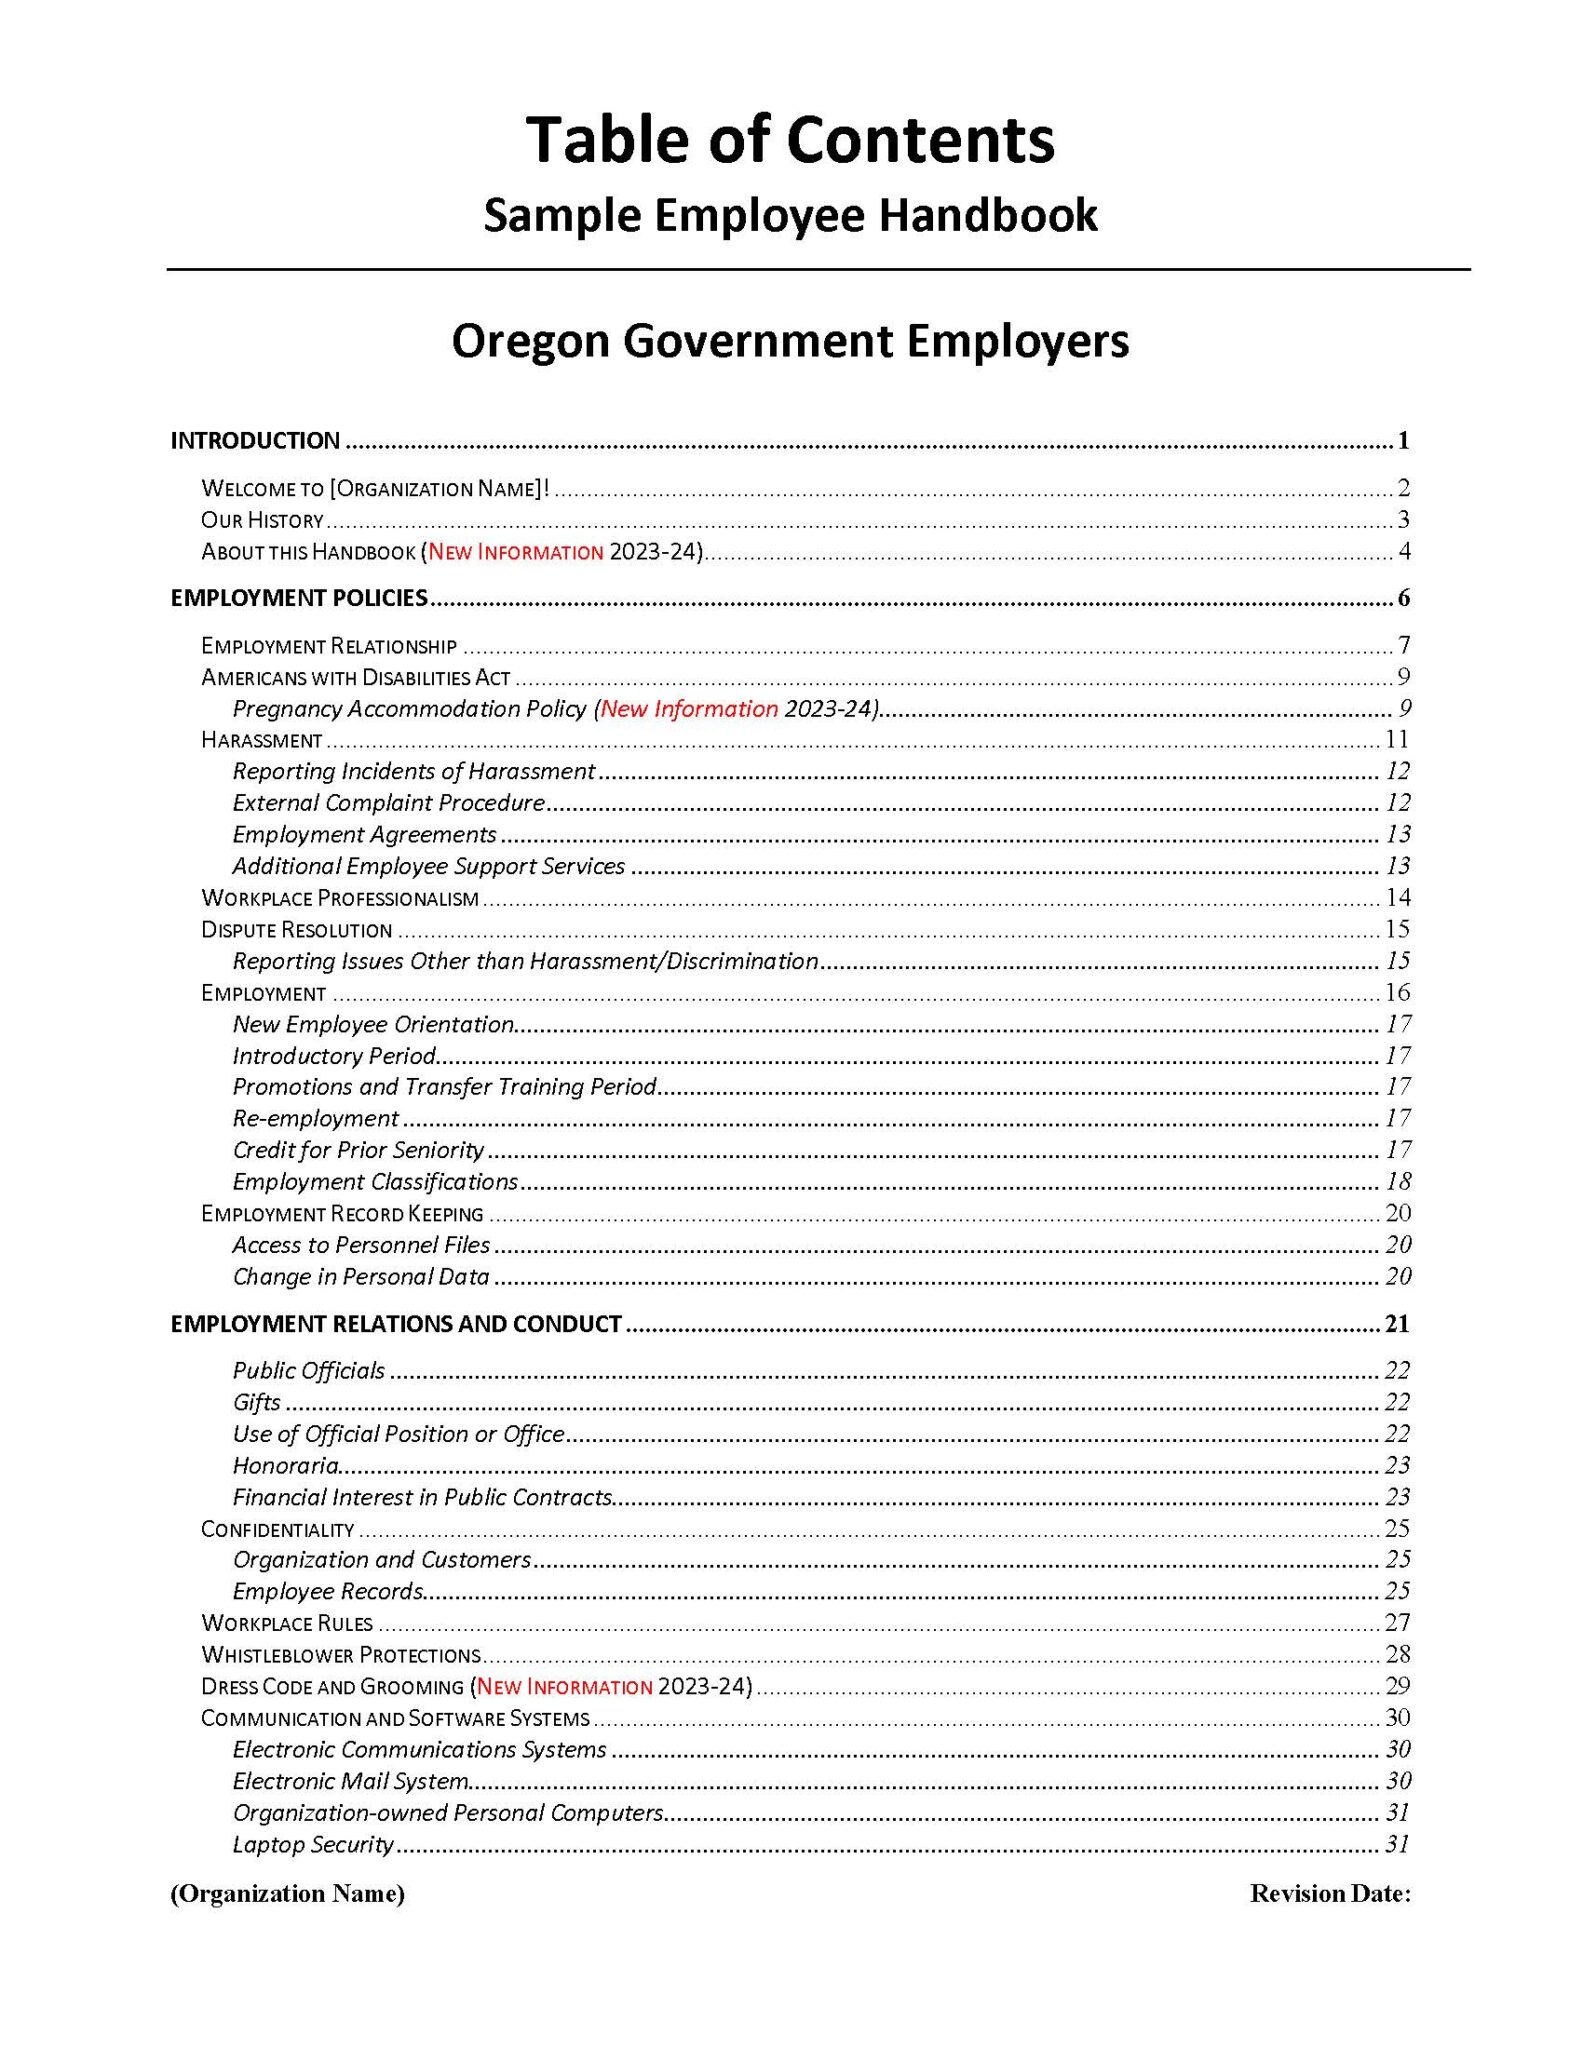 2023 24 Oregon Government Sample HB TOC Page 1 1 1583x2048 